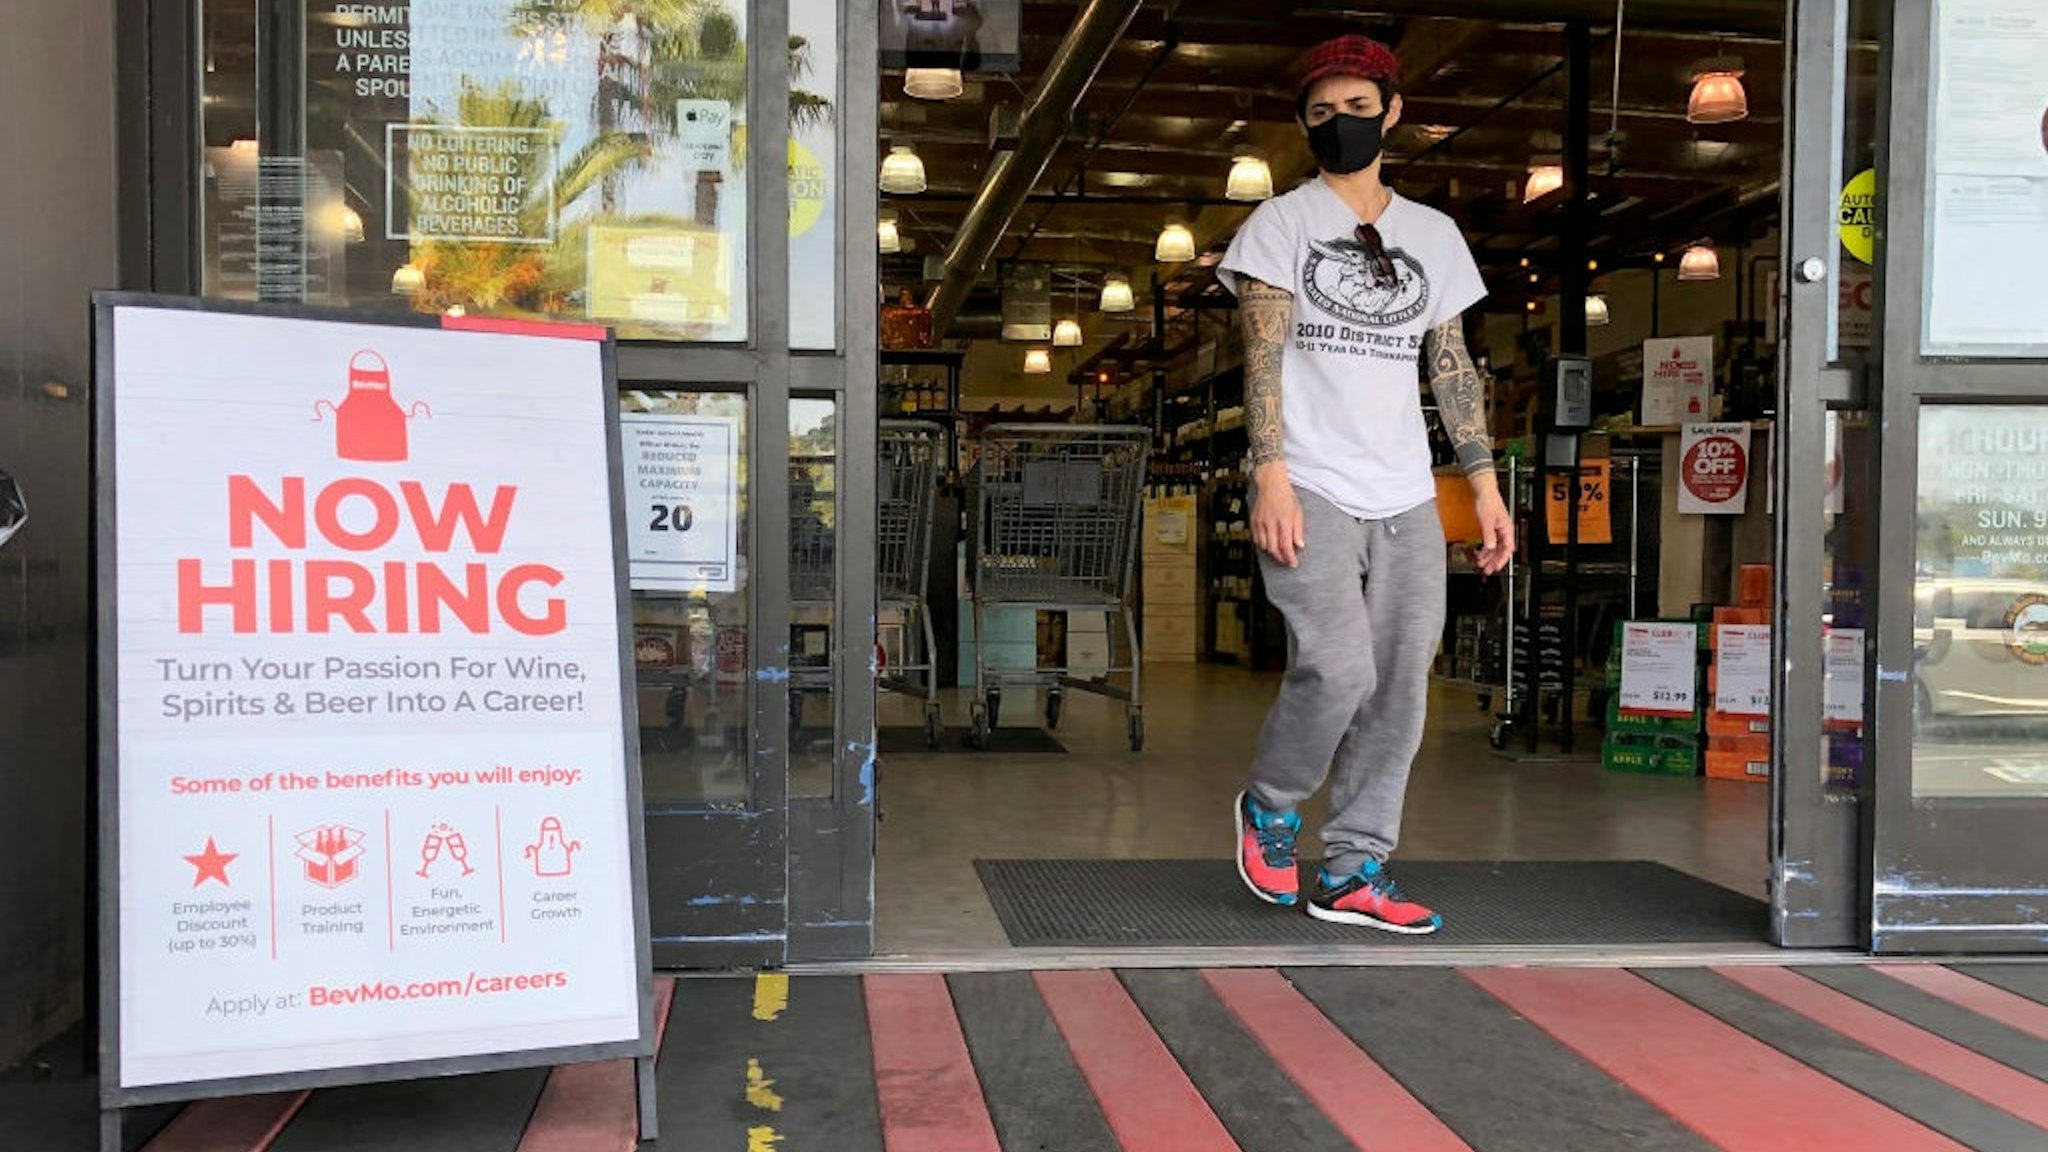 LARKSPUR, CALIFORNIA - APRIL 02: A customer walks by a now hiring sign at a BevMo store on April 02, 2021 in Larkspur, California.